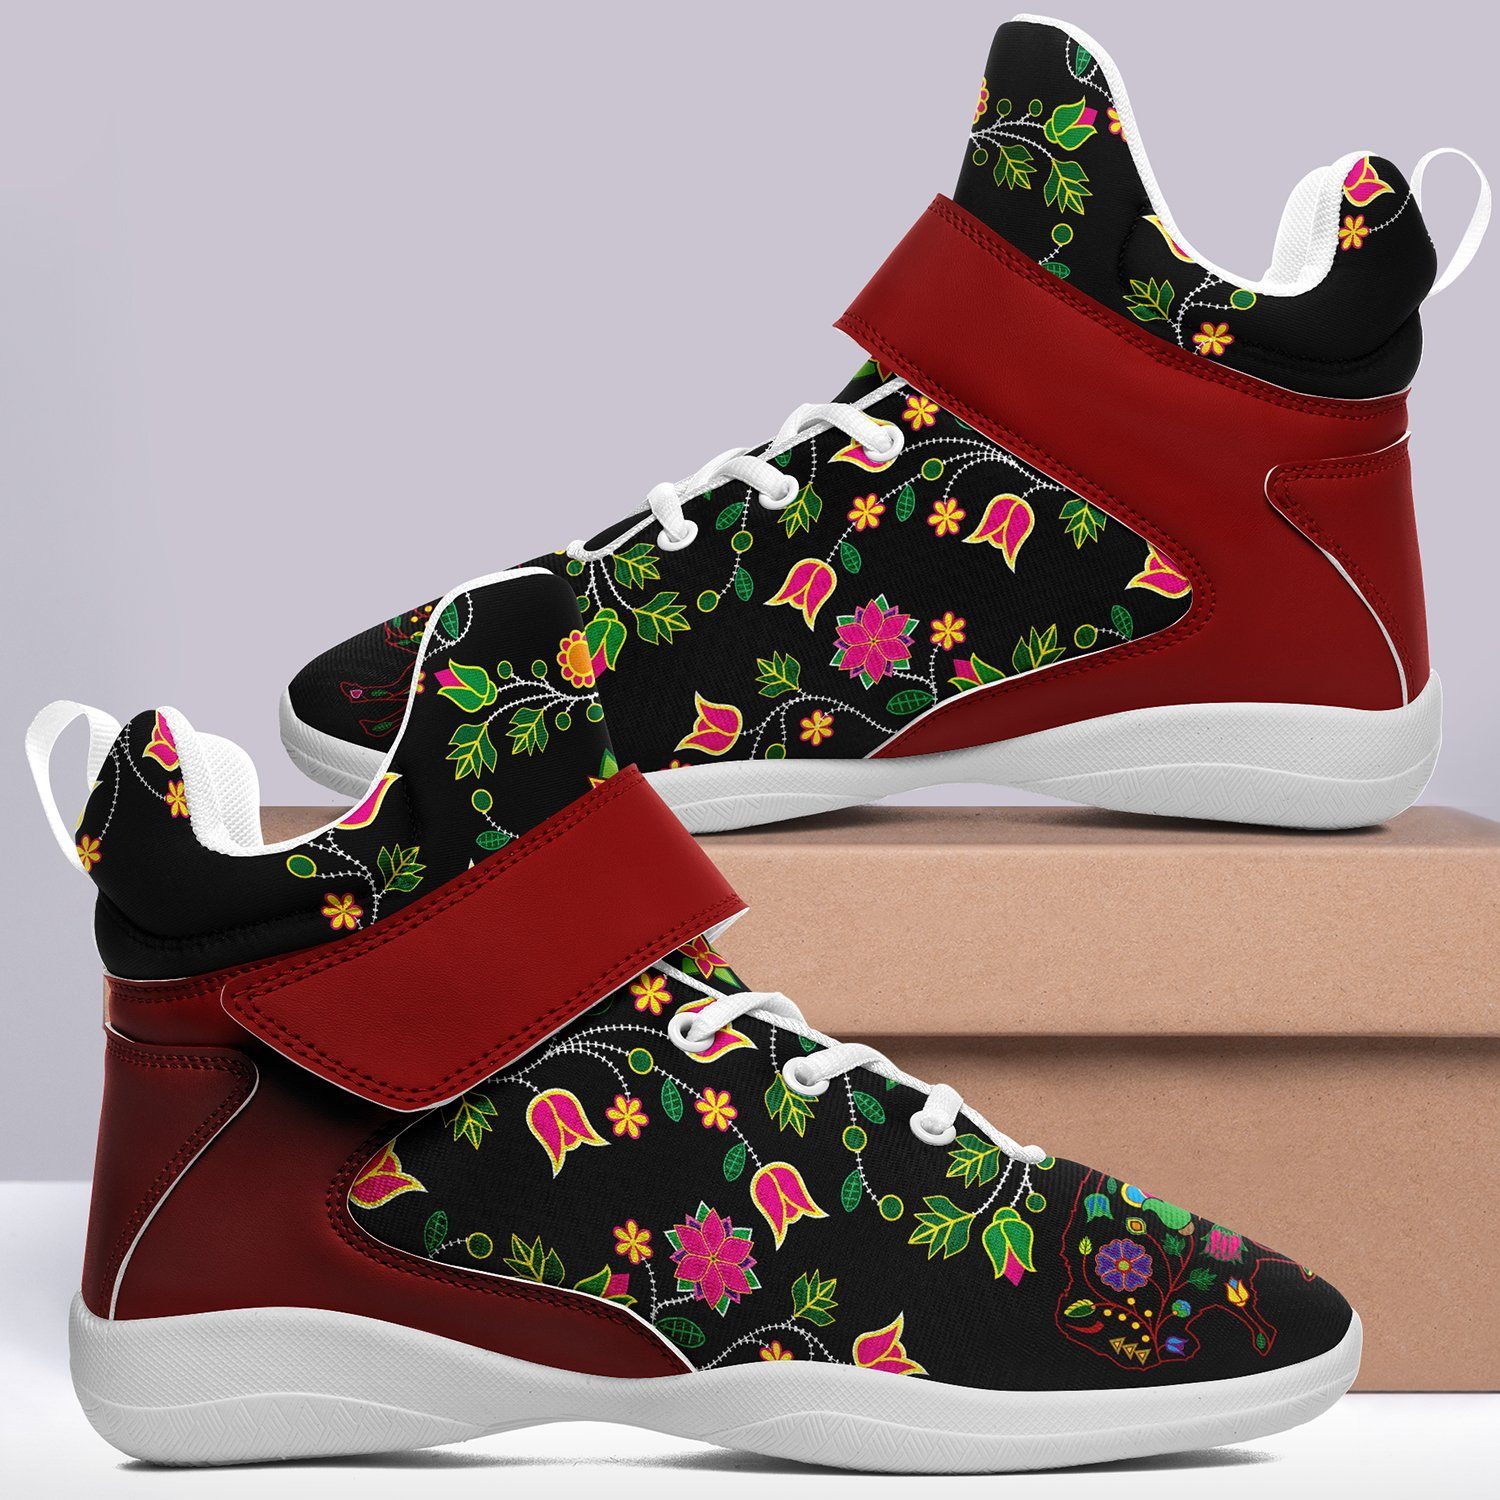 Floral Buffalo Ipottaa Basketball / Sport High Top Shoes - White Sole 49 Dzine 